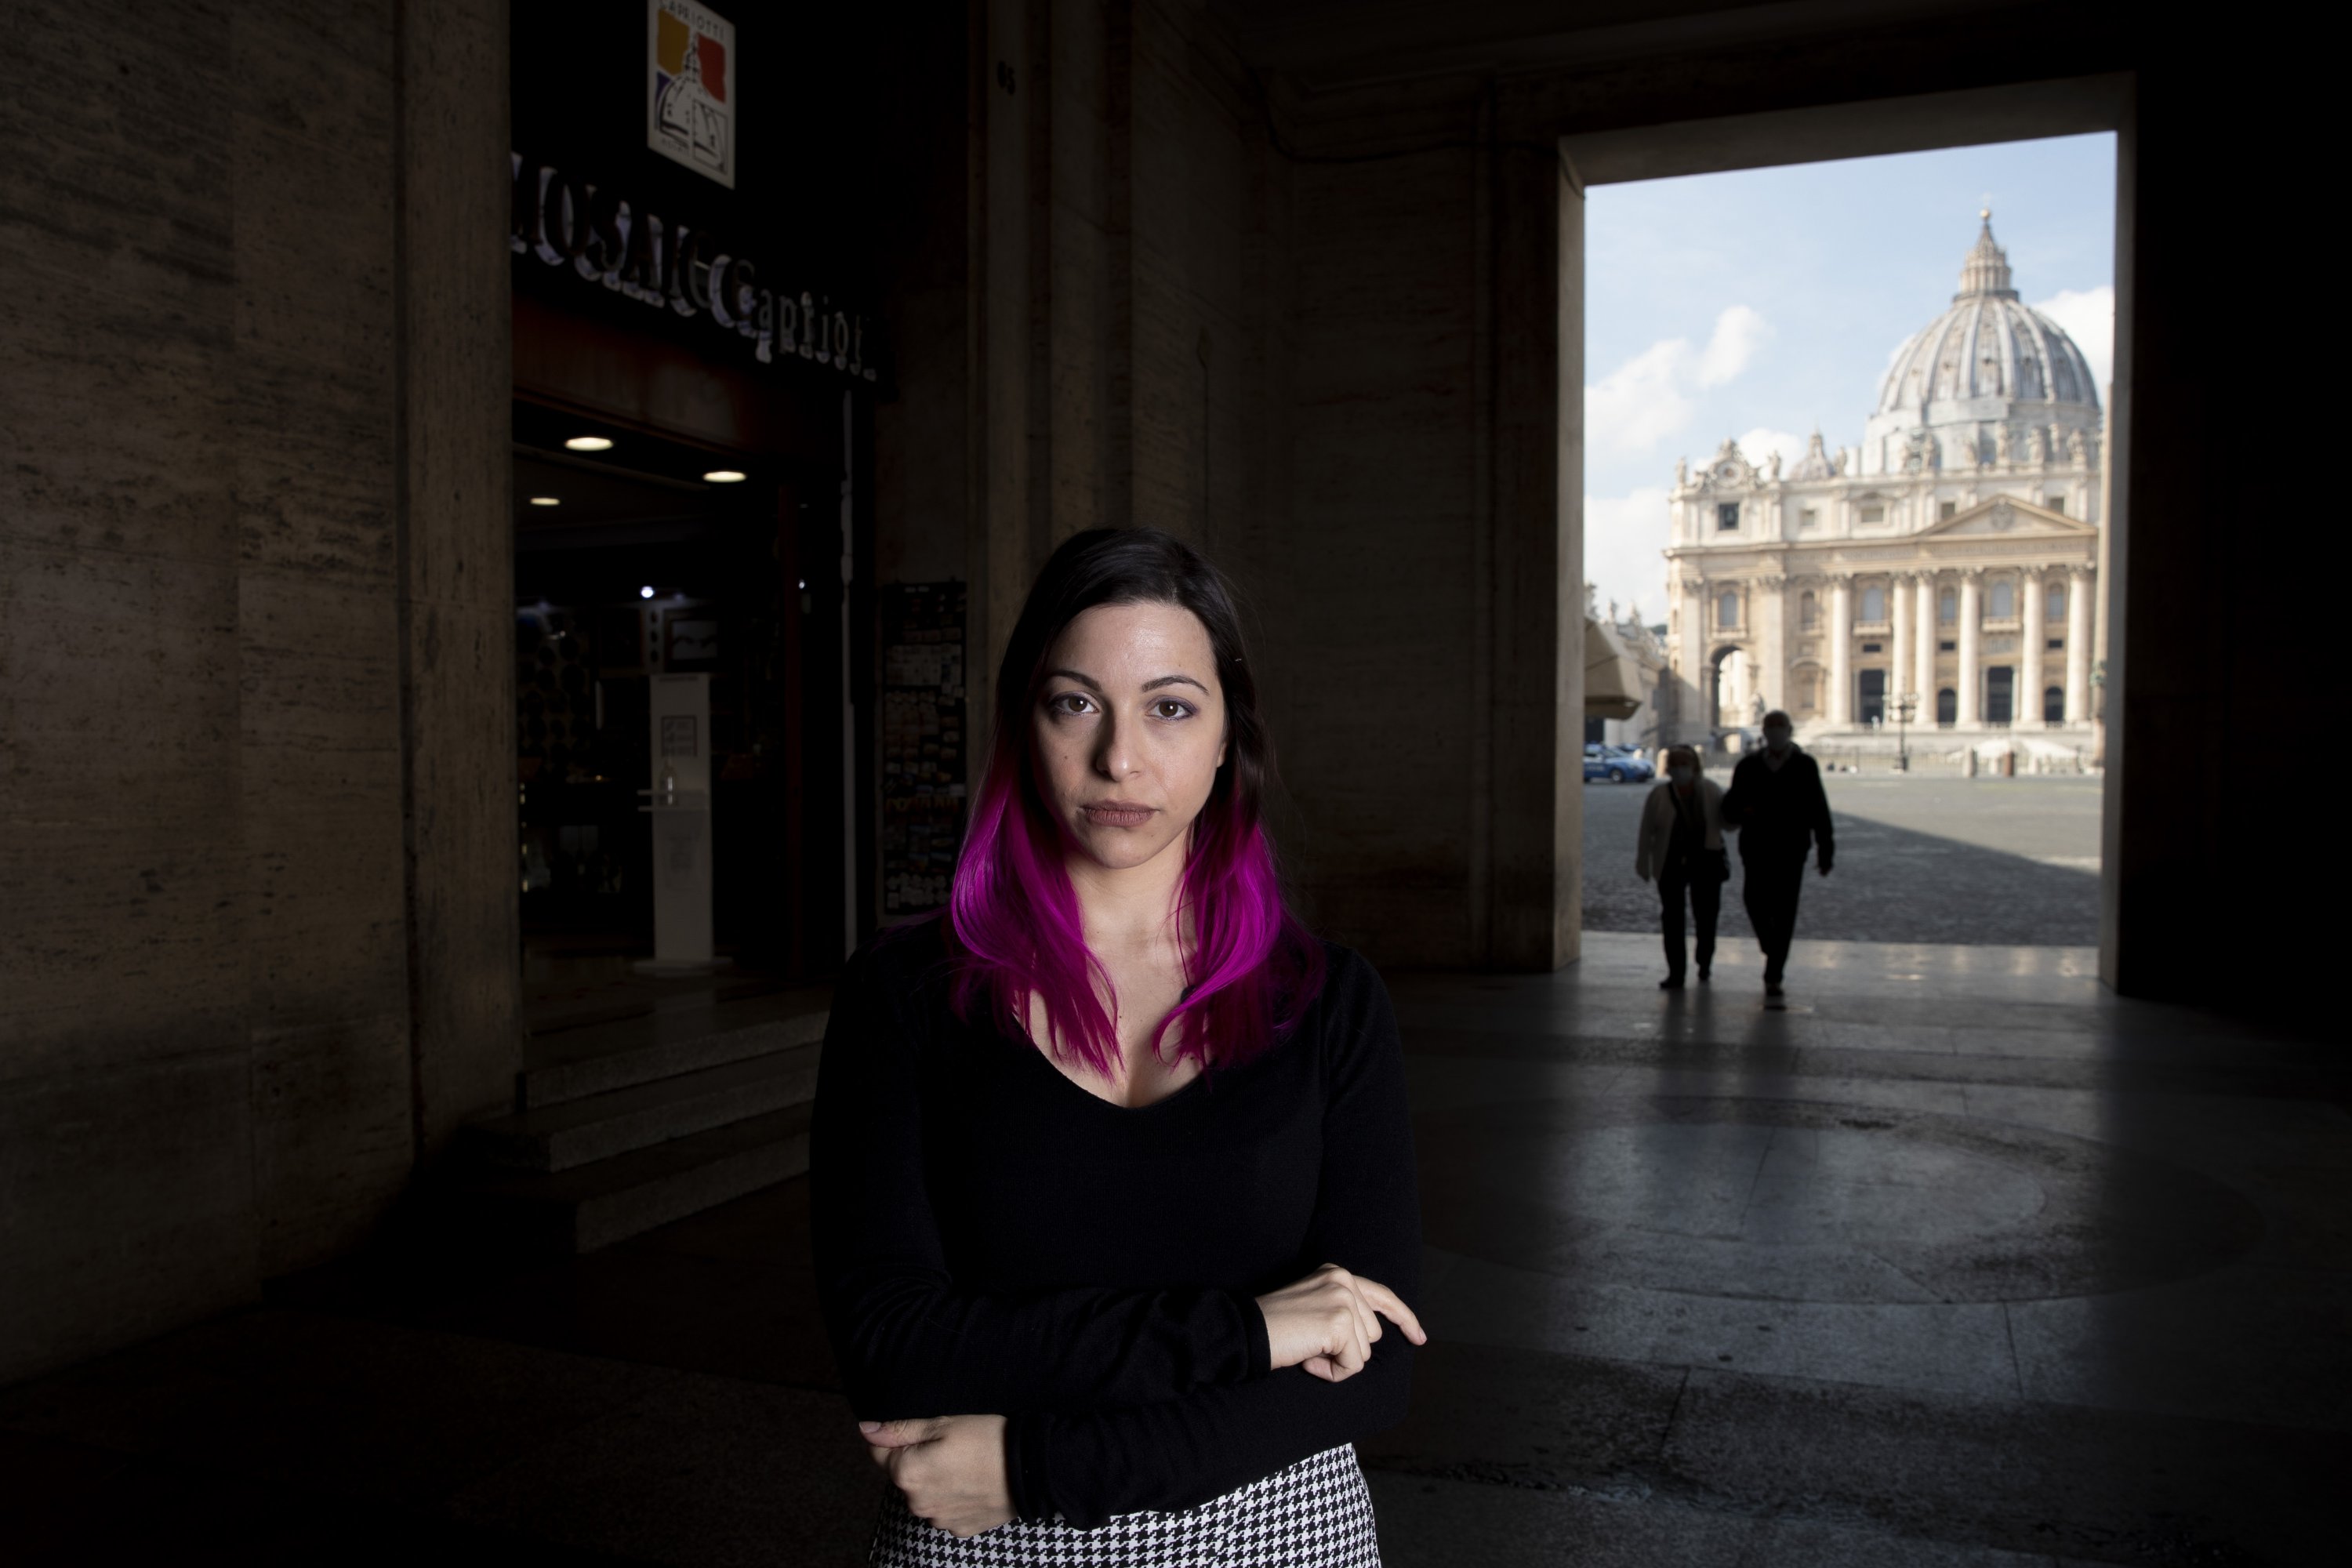 Tour guide Laura Taddeo poses for a portrait in front of the Vatican, Italy, March 4, 2021. (AP Photo)